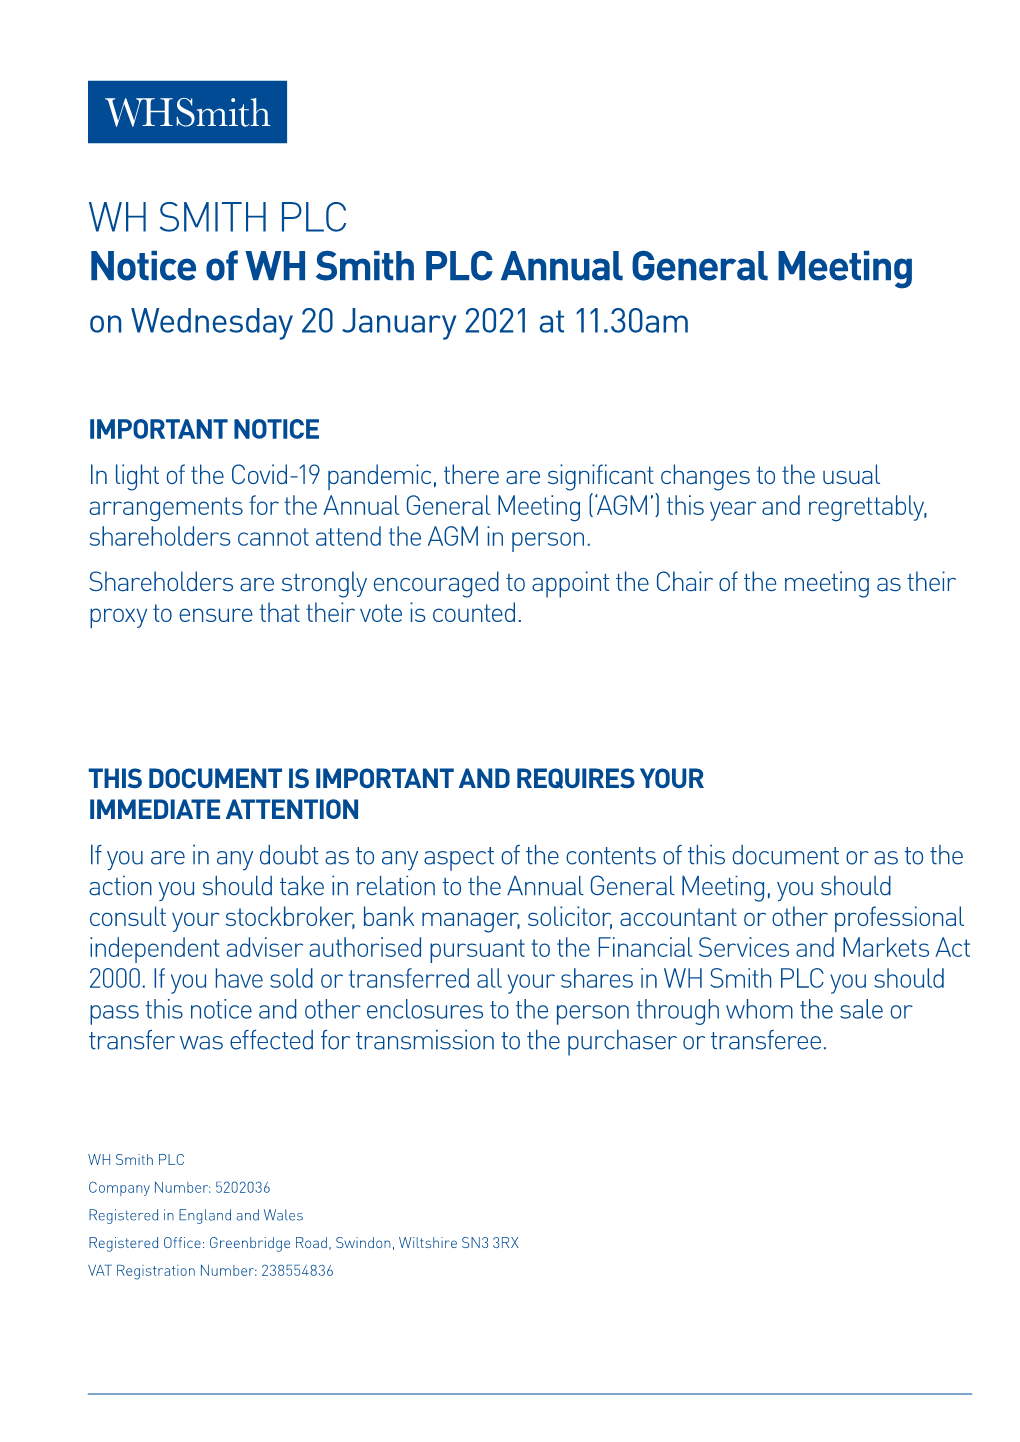 WH SMITH PLC Notice of WH Smith PLC Annual General Meeting on Wednesday 20 January 2021 at 11.30Am